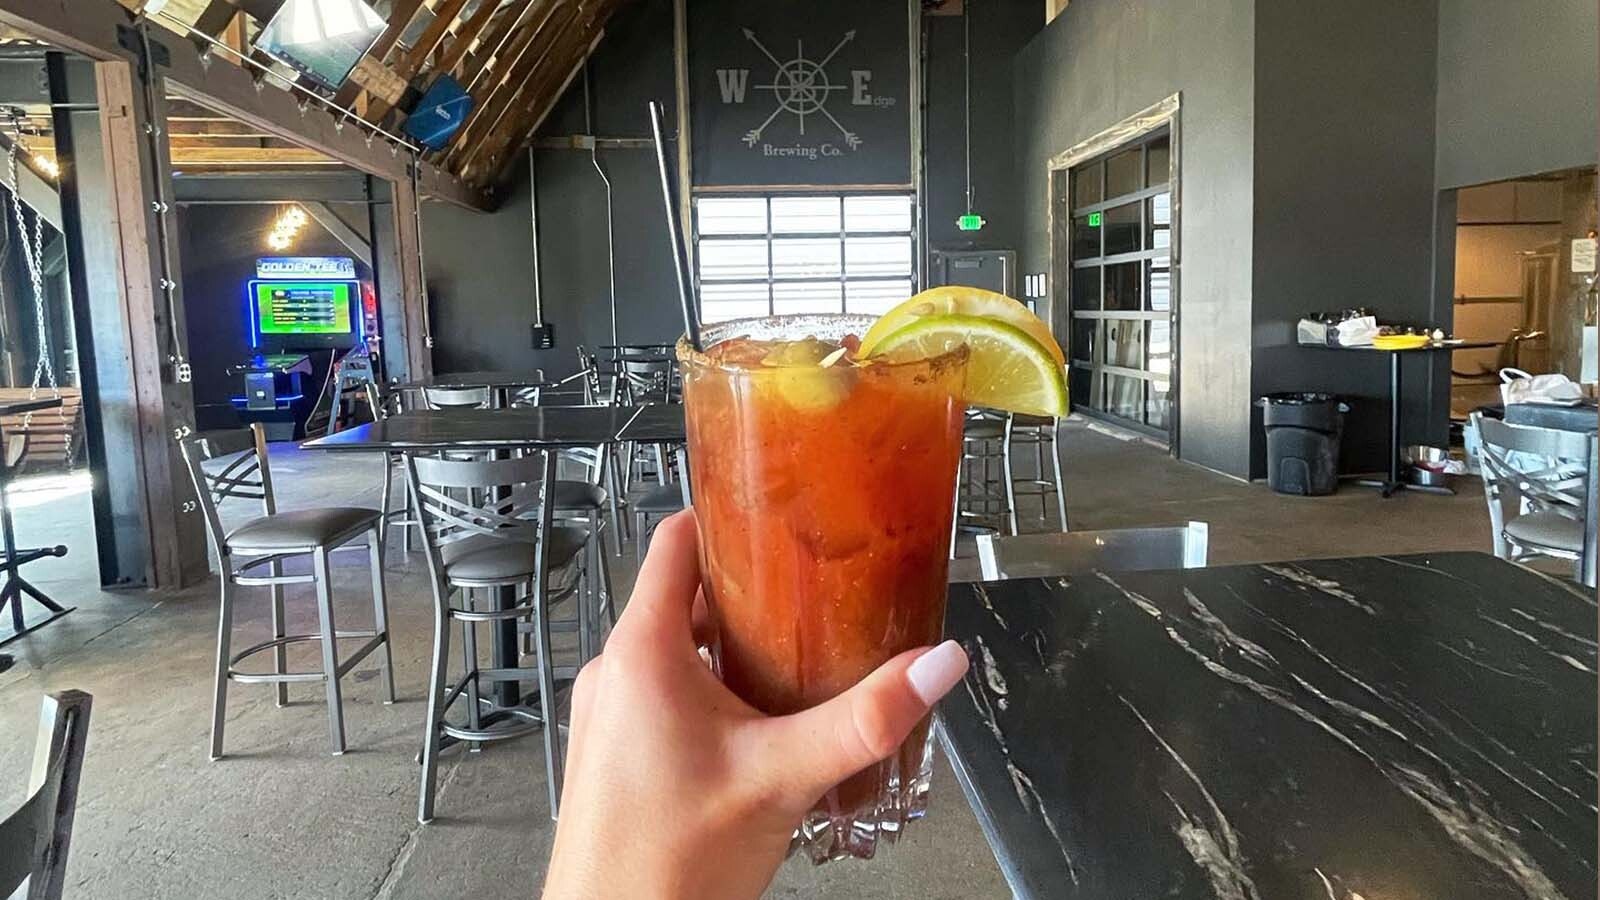 The Westby Edge bloody mary.